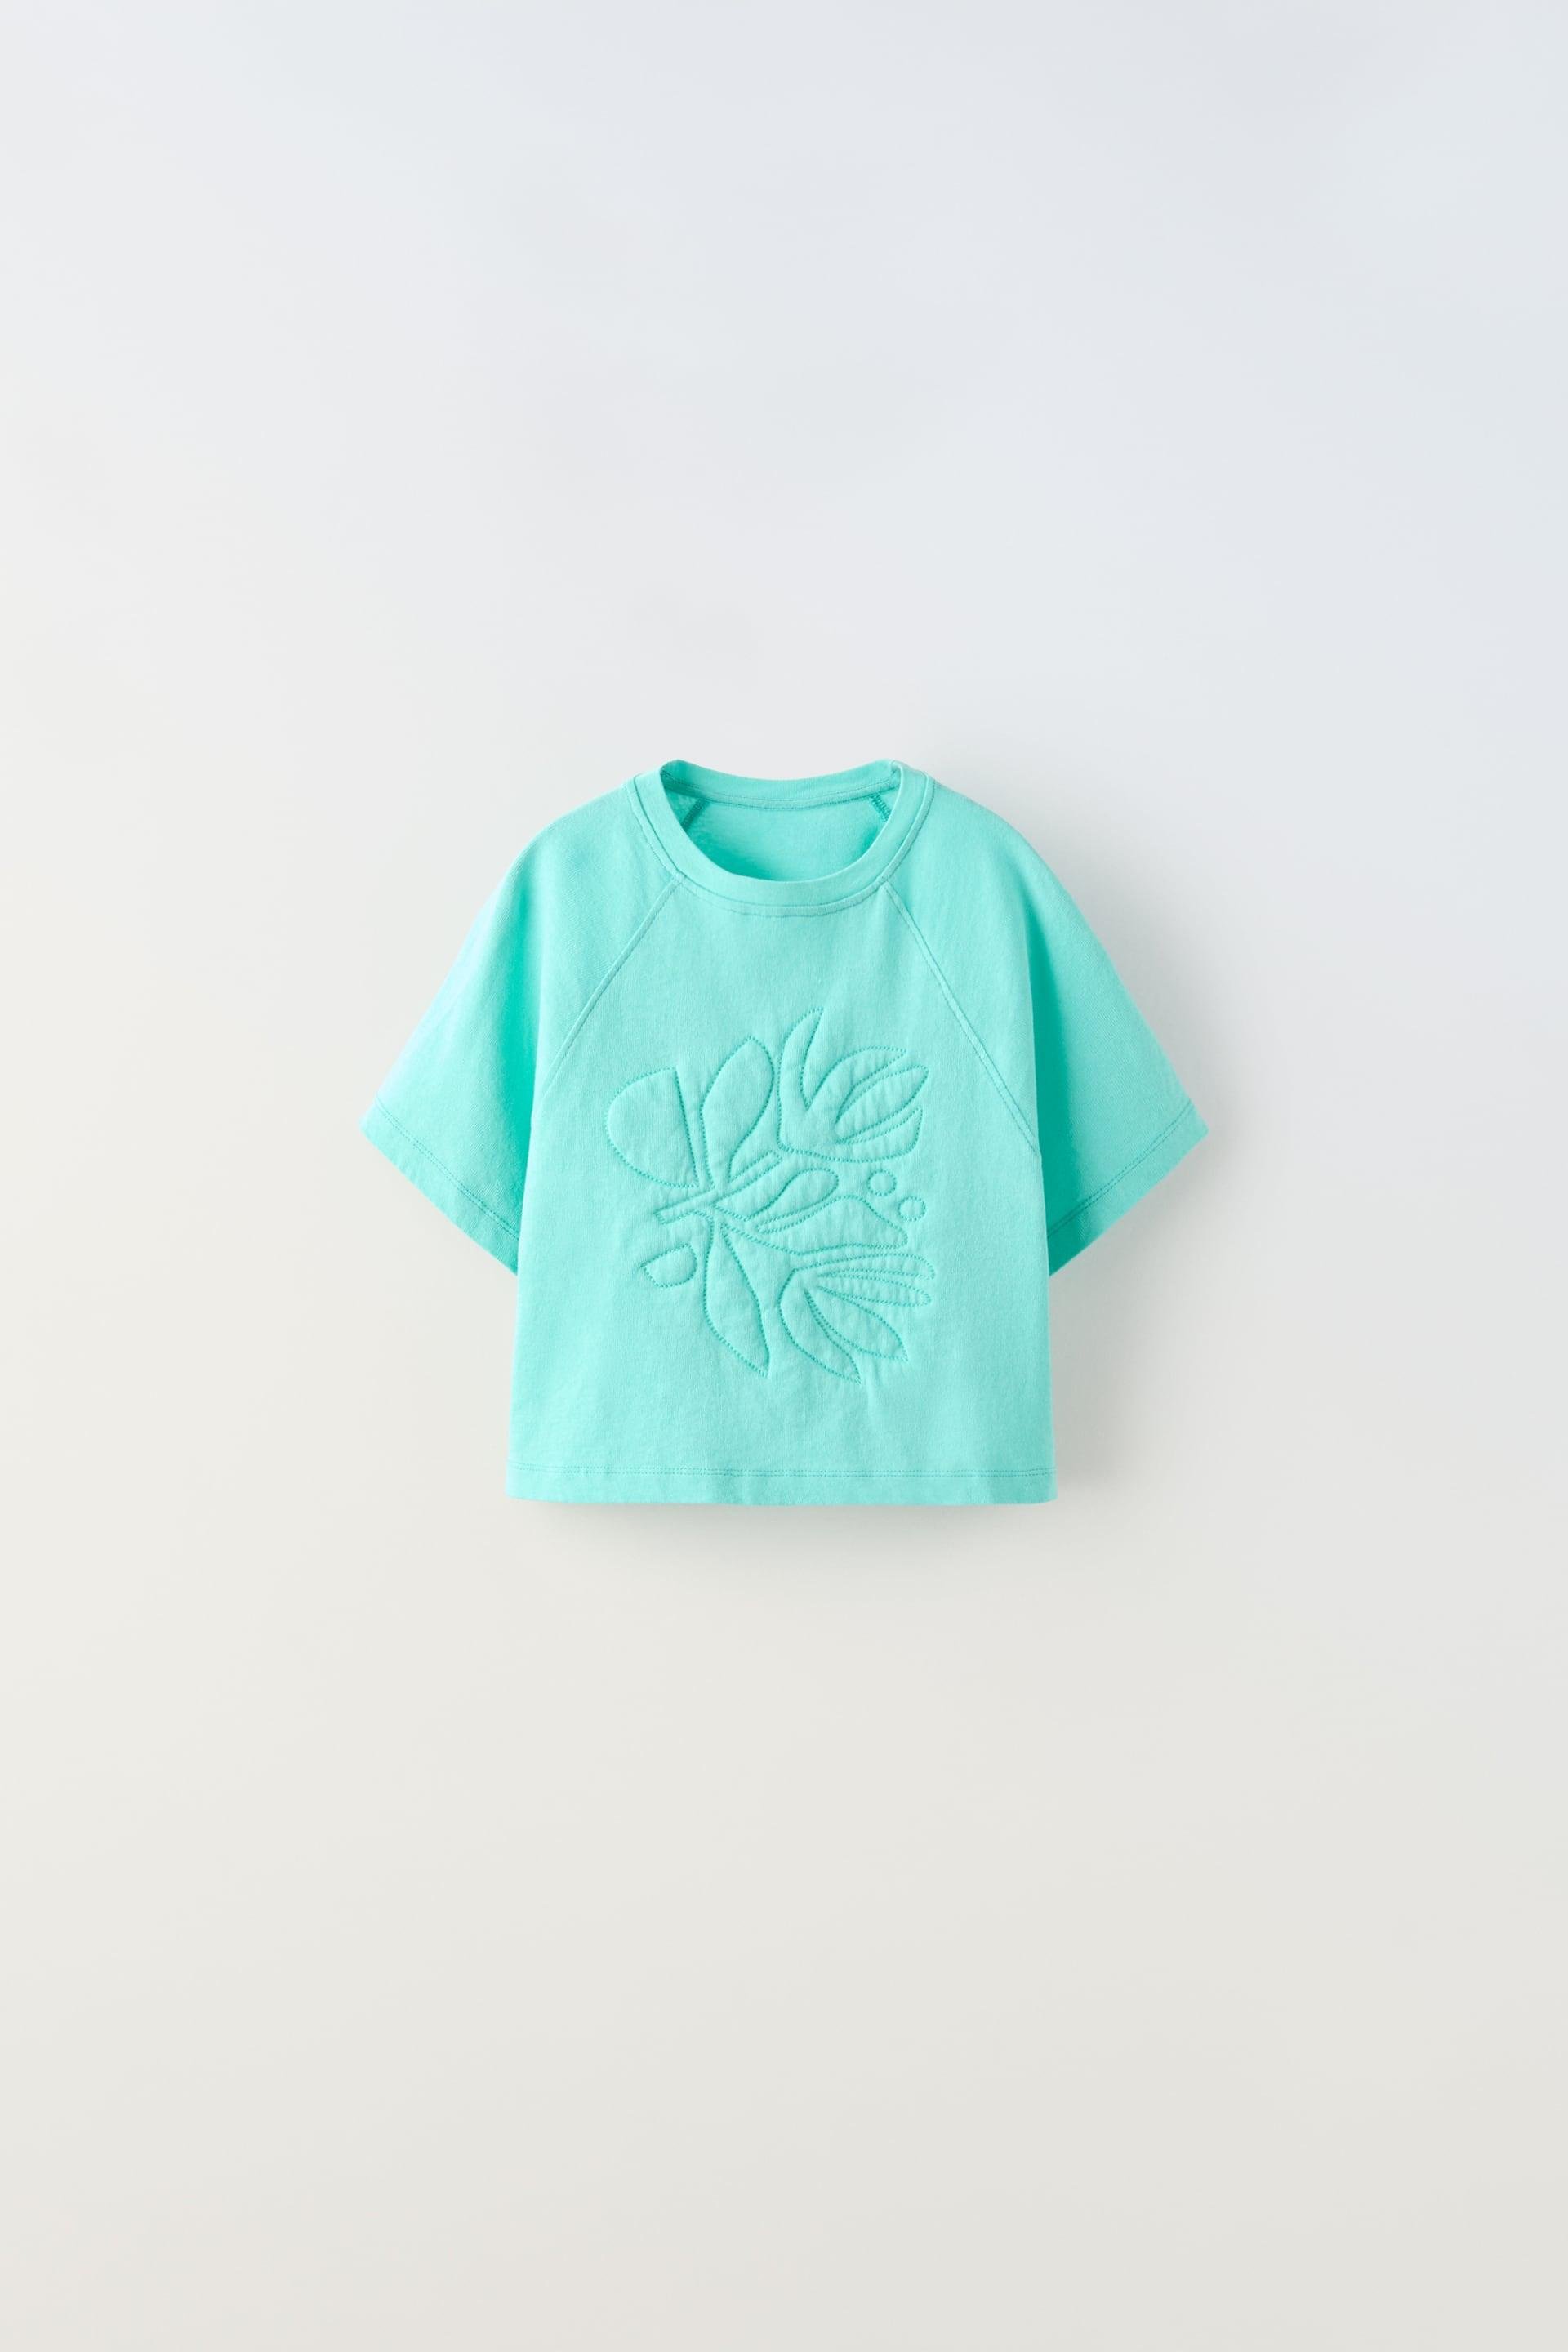 RAISED EMBROIDERY T-SHIRT by ZARA